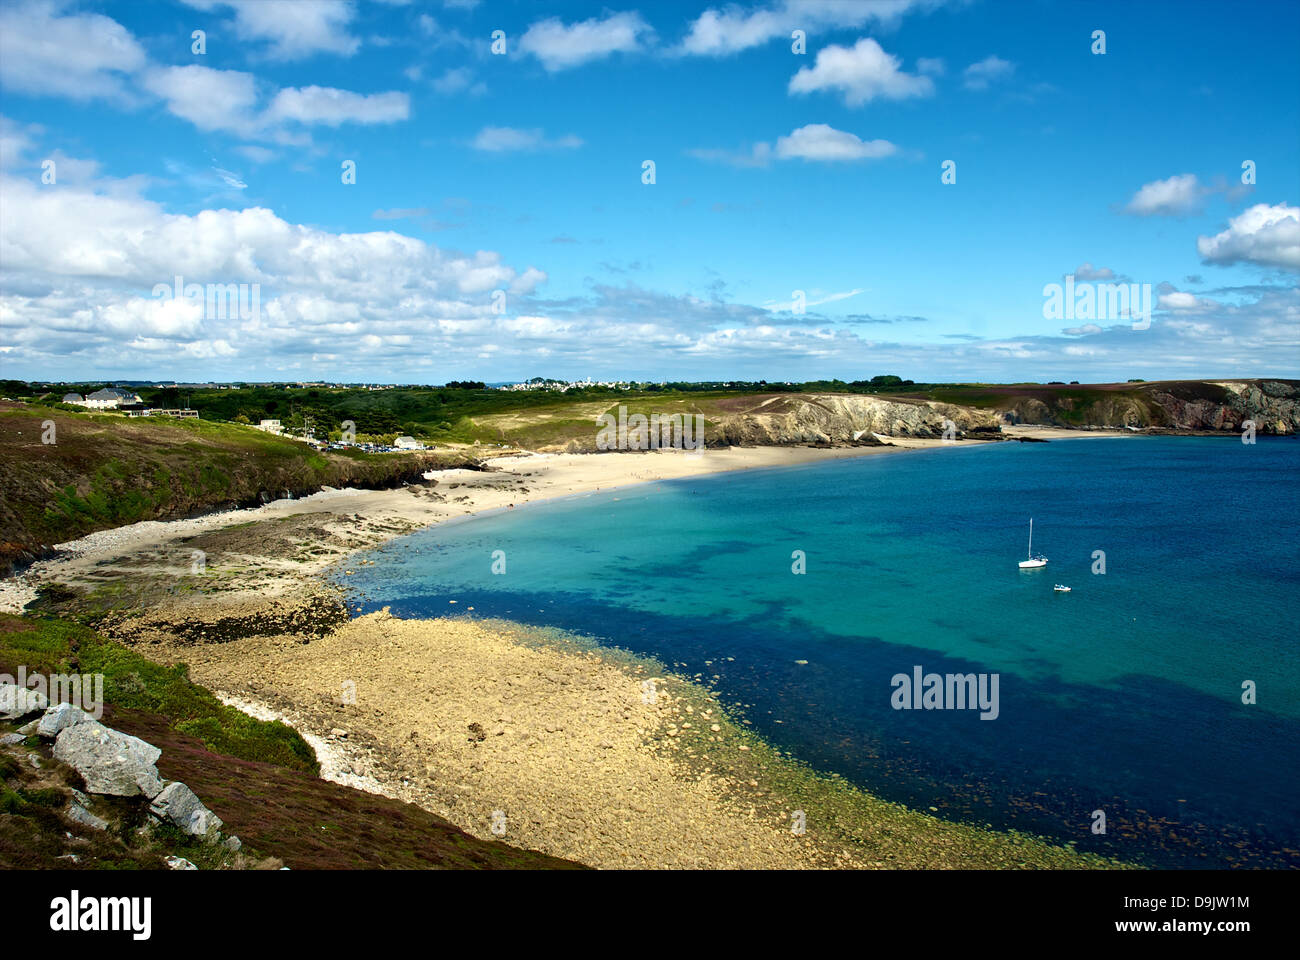 Coastline and beach of Normandy, France Stock Photo